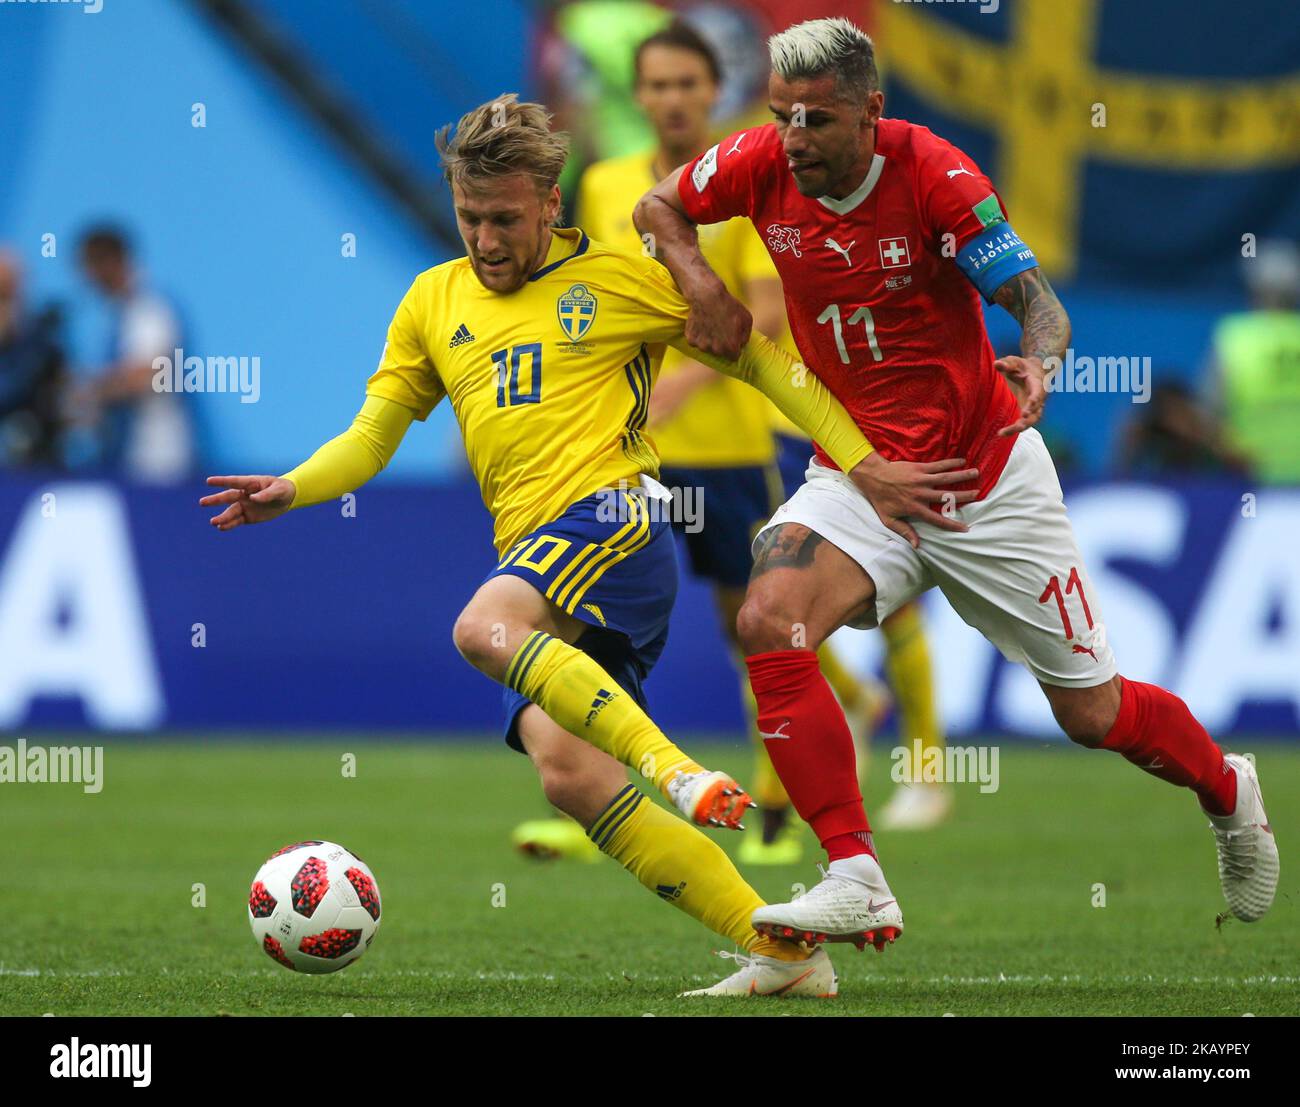 Valon Behrami (R) of the Switzerland national football team and Emil Forsberg of the Sweden national football team vie for the ball during the 2018 FIFA World Cup match, Round of 16 between Sweden and Switzerland at Saint Petersburg Stadium on July 03, 2018 in St. Petersburg, Russia. (Photo by Igor Russak/NurPhoto) Stock Photo